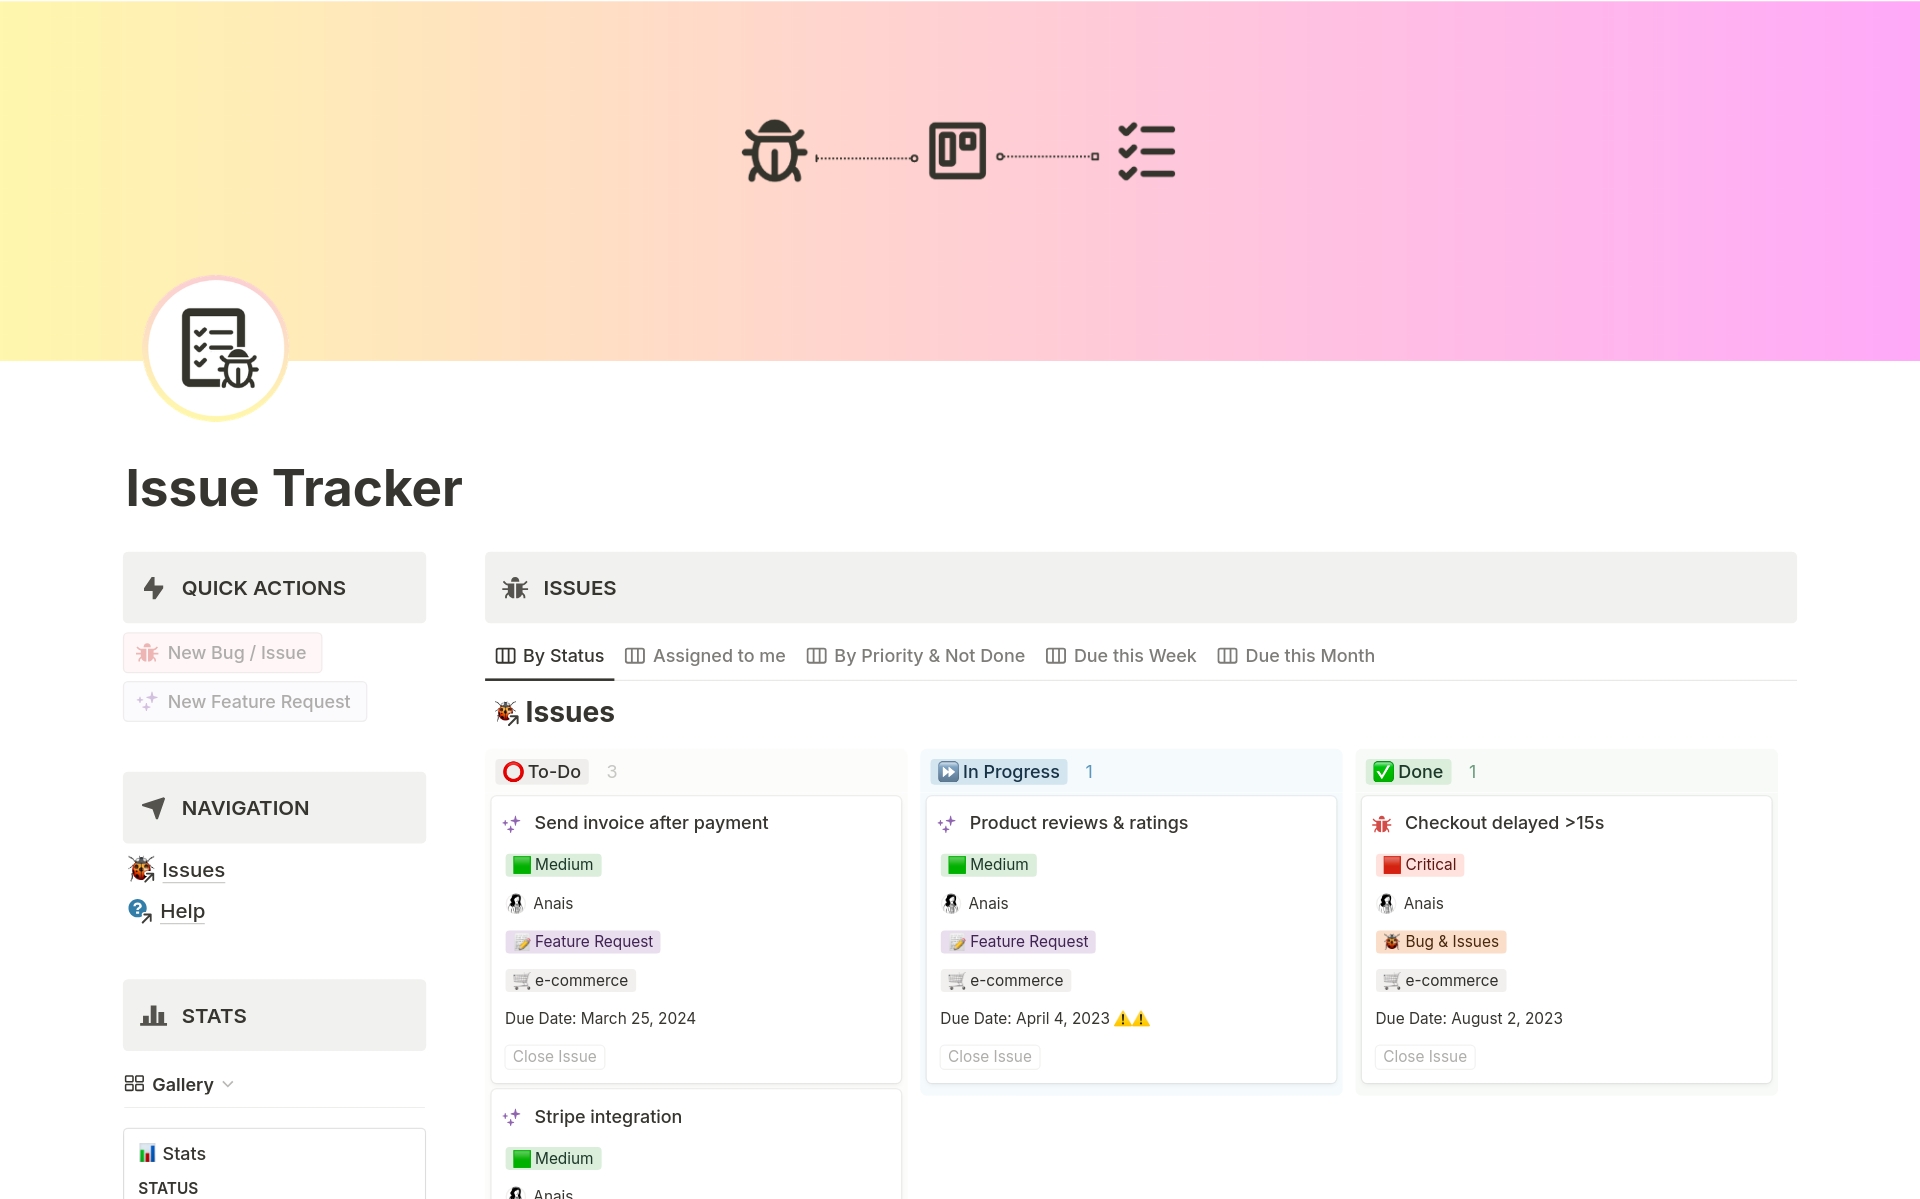 Easily manage and track bugs, issues and feature requests for products and projects.